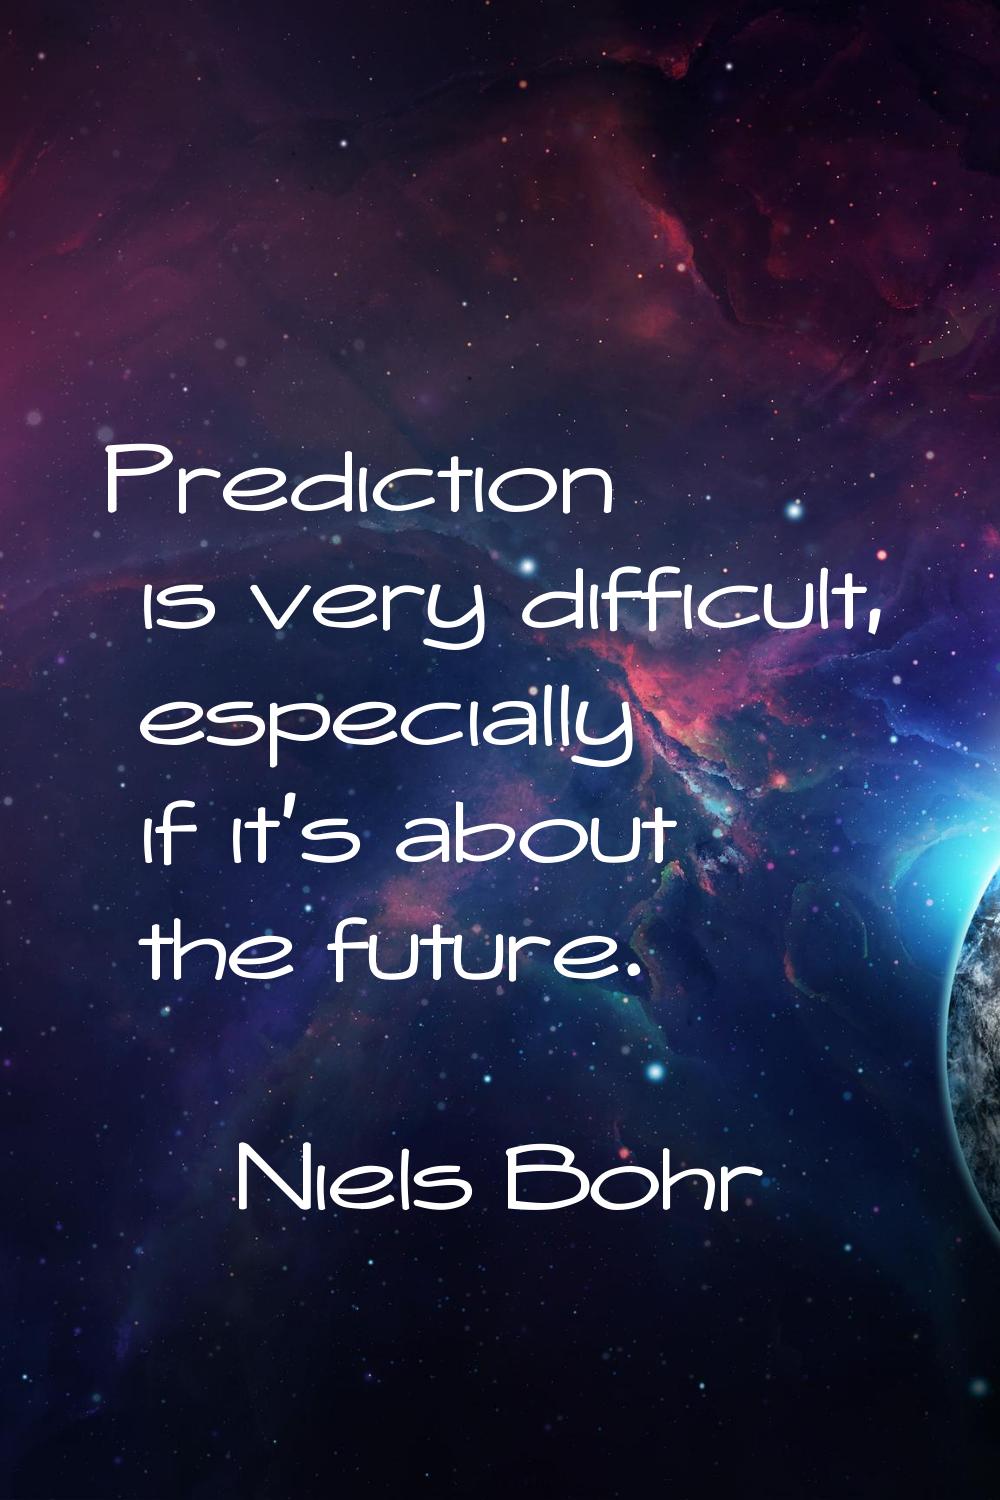 Prediction is very difficult, especially if it's about the future.